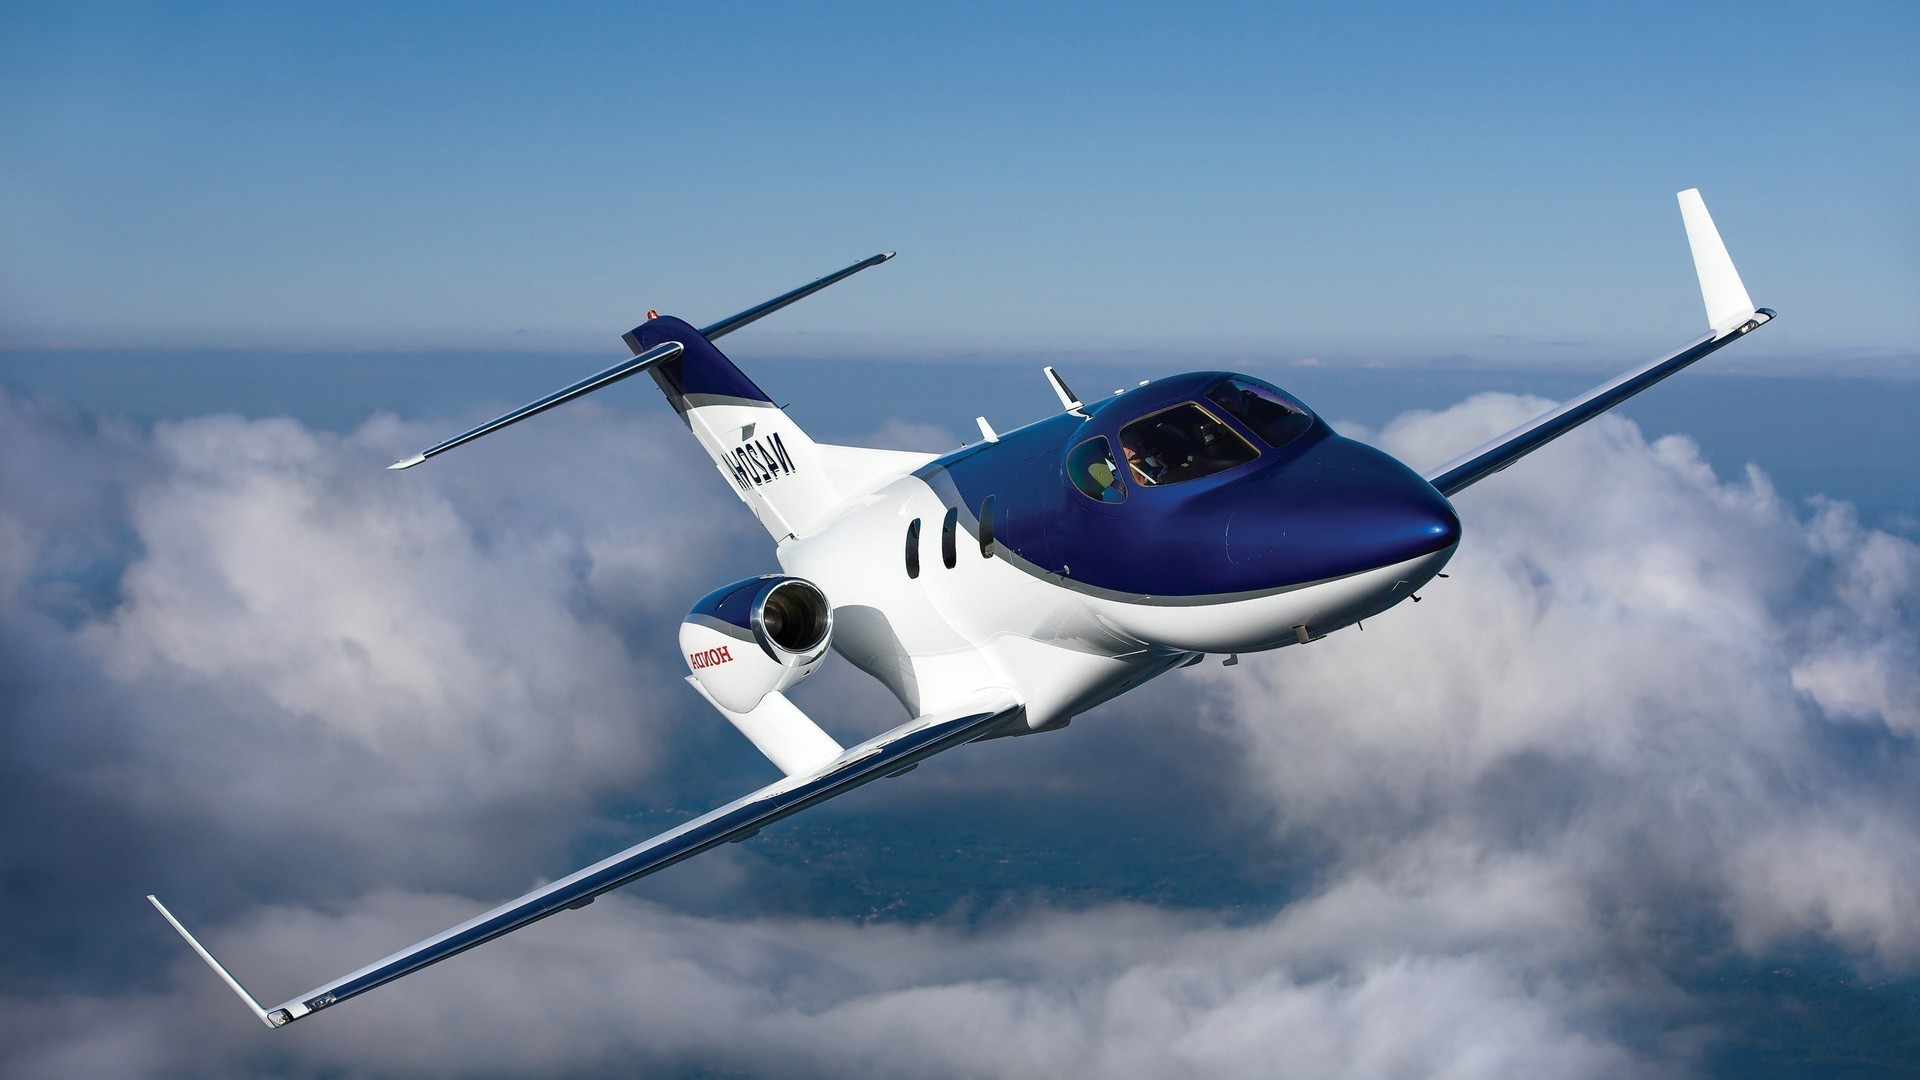 private jets aircraft airplane sky air flight transportation system turbine vehicle airport propeller fly wind travel helicopter wing technology engine